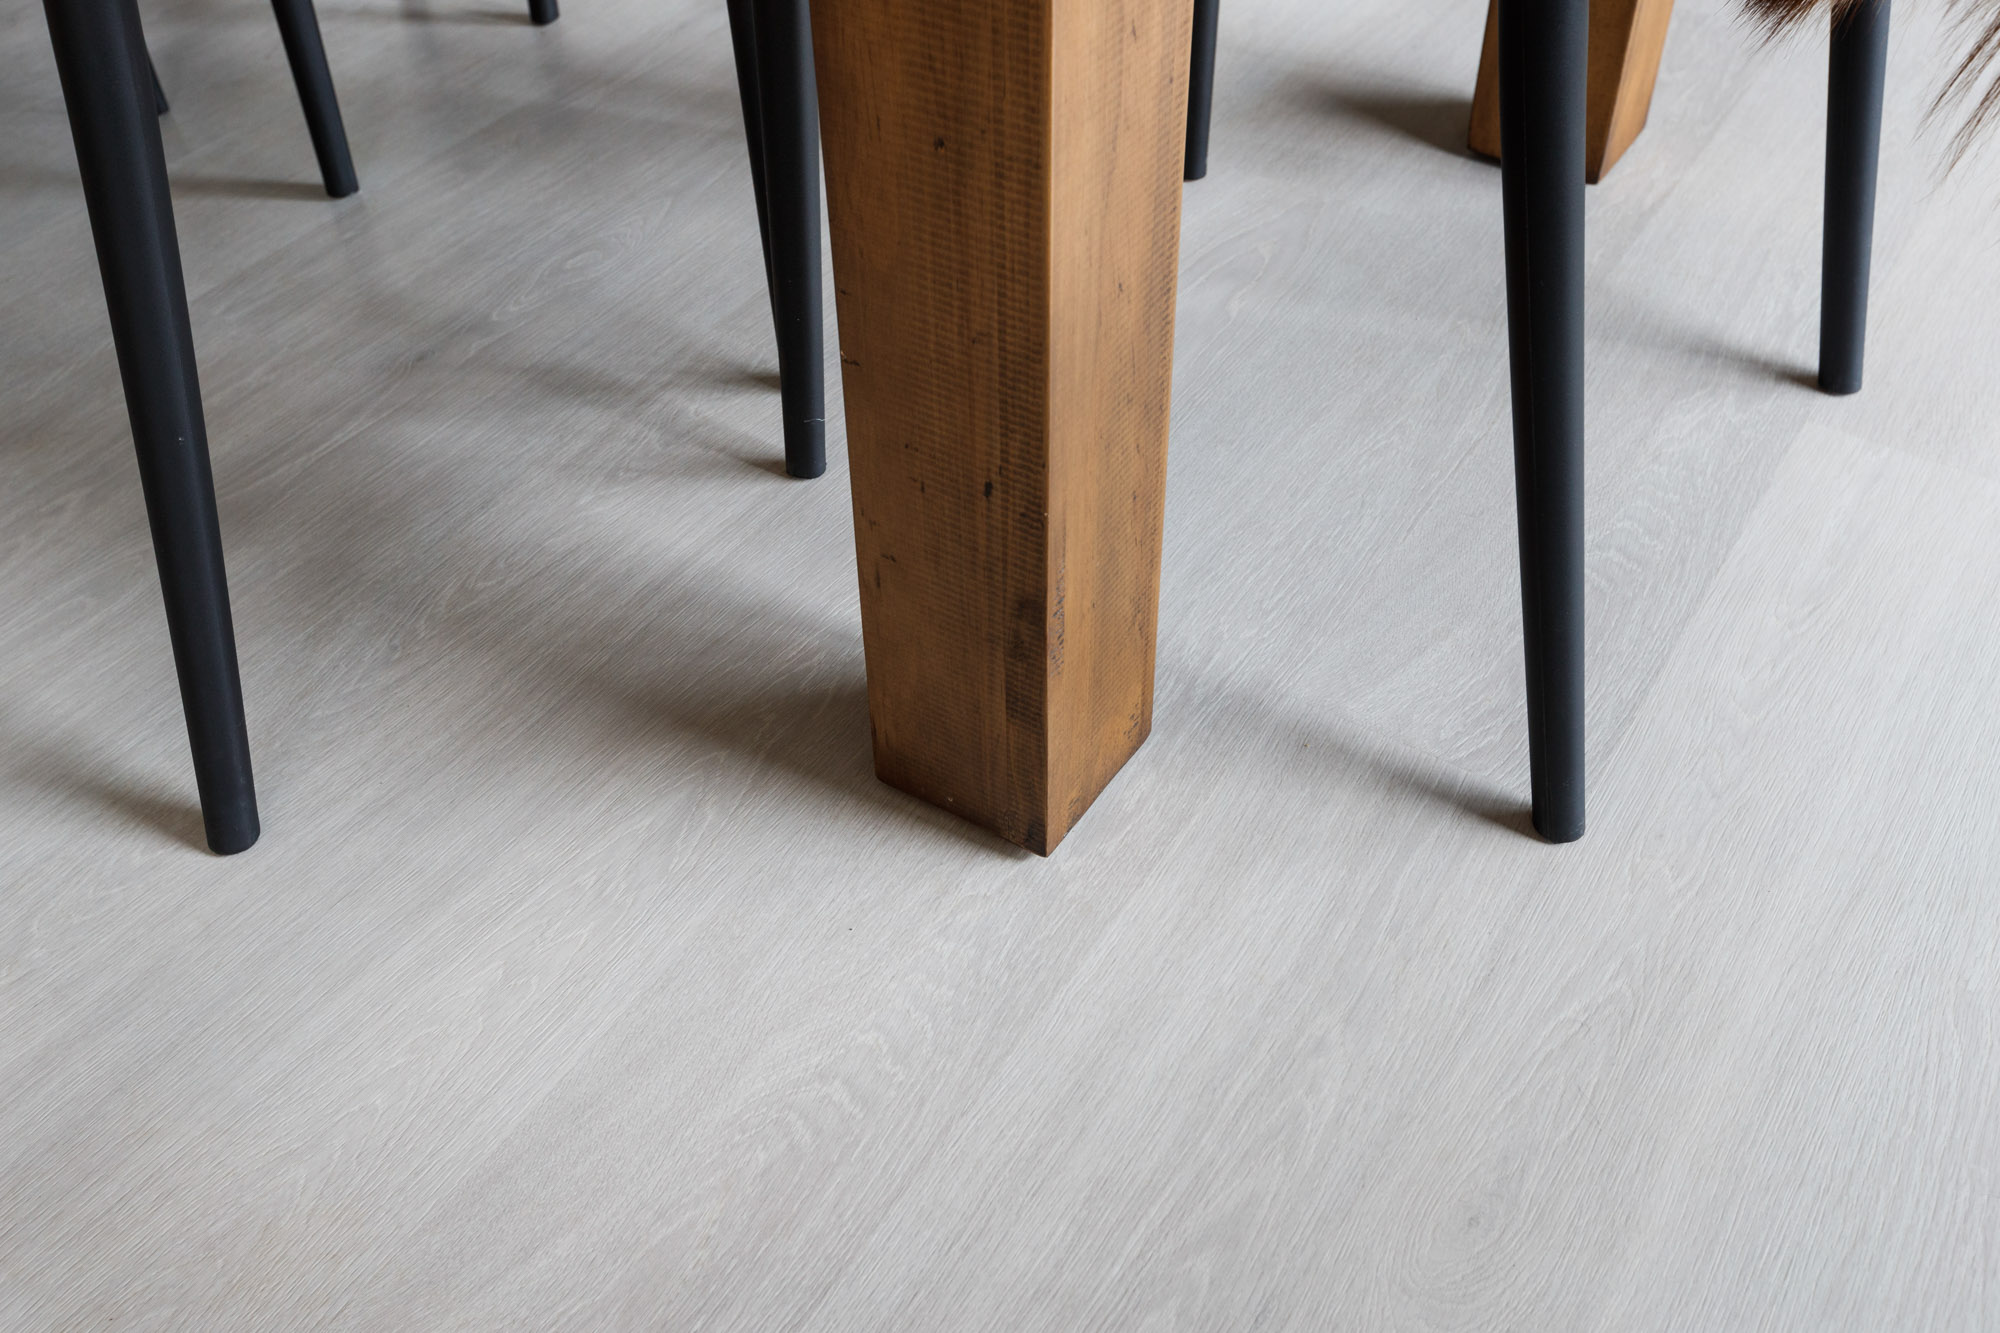 Sarcich_residence_flooring-8